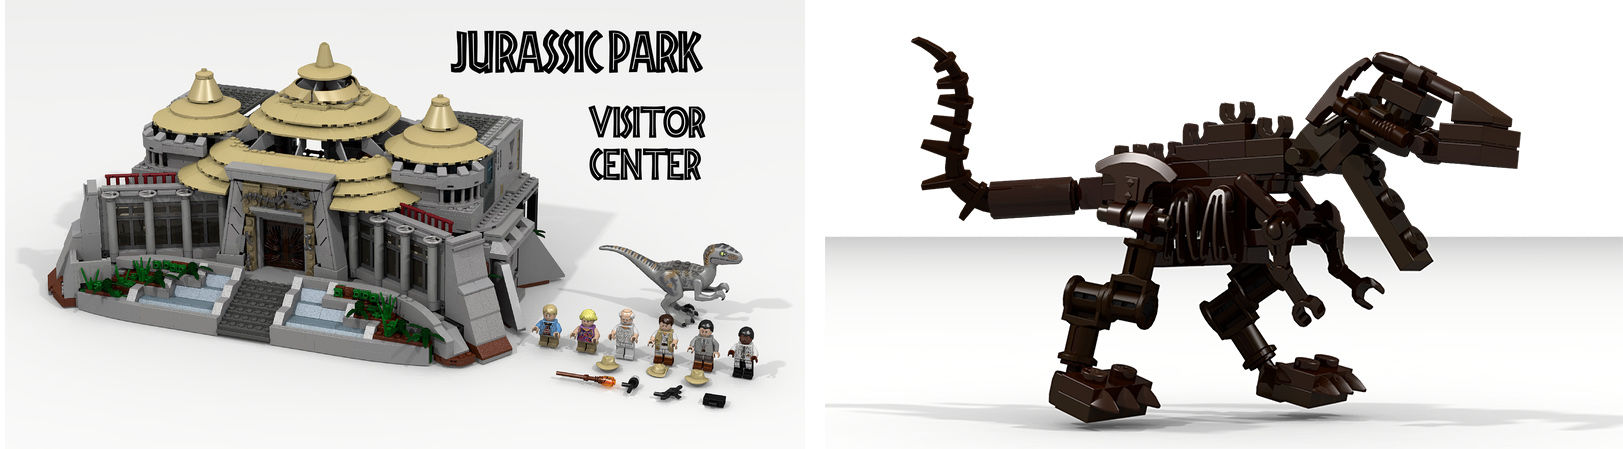 rejected lego ideas jurassic park visitor center